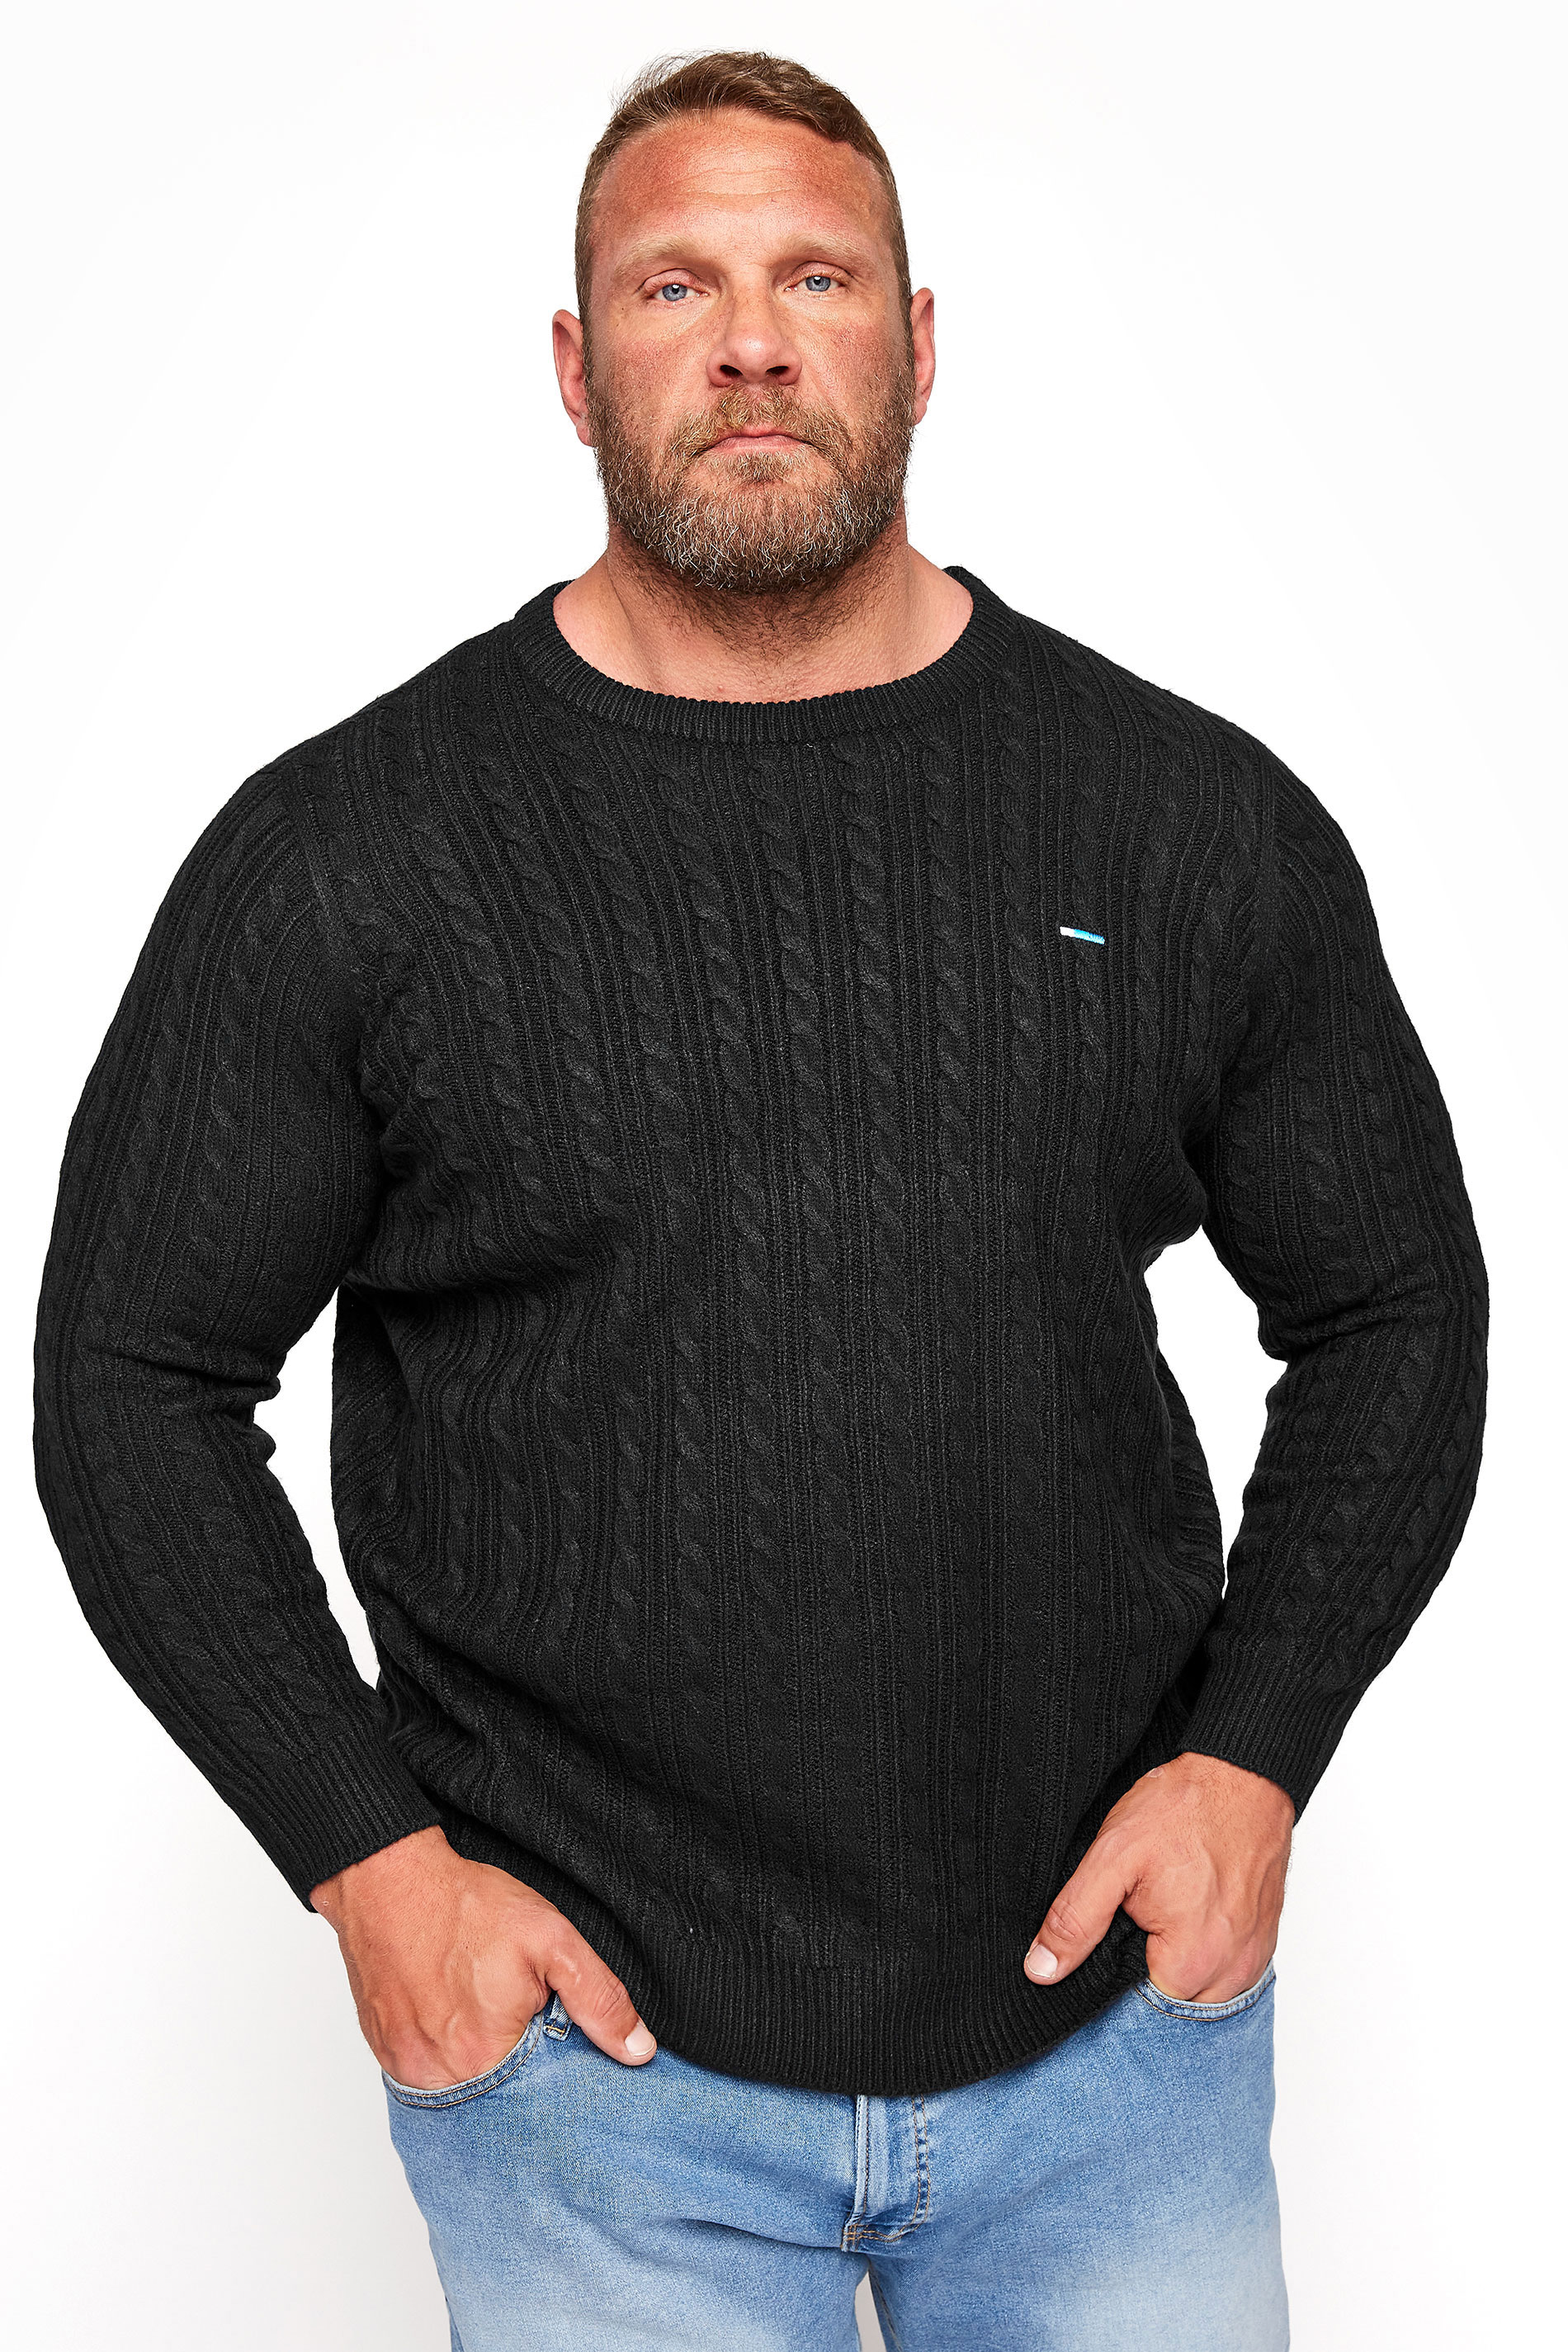 BadRhino Black Essential Cable Knitted Jumper | BadRhino 1